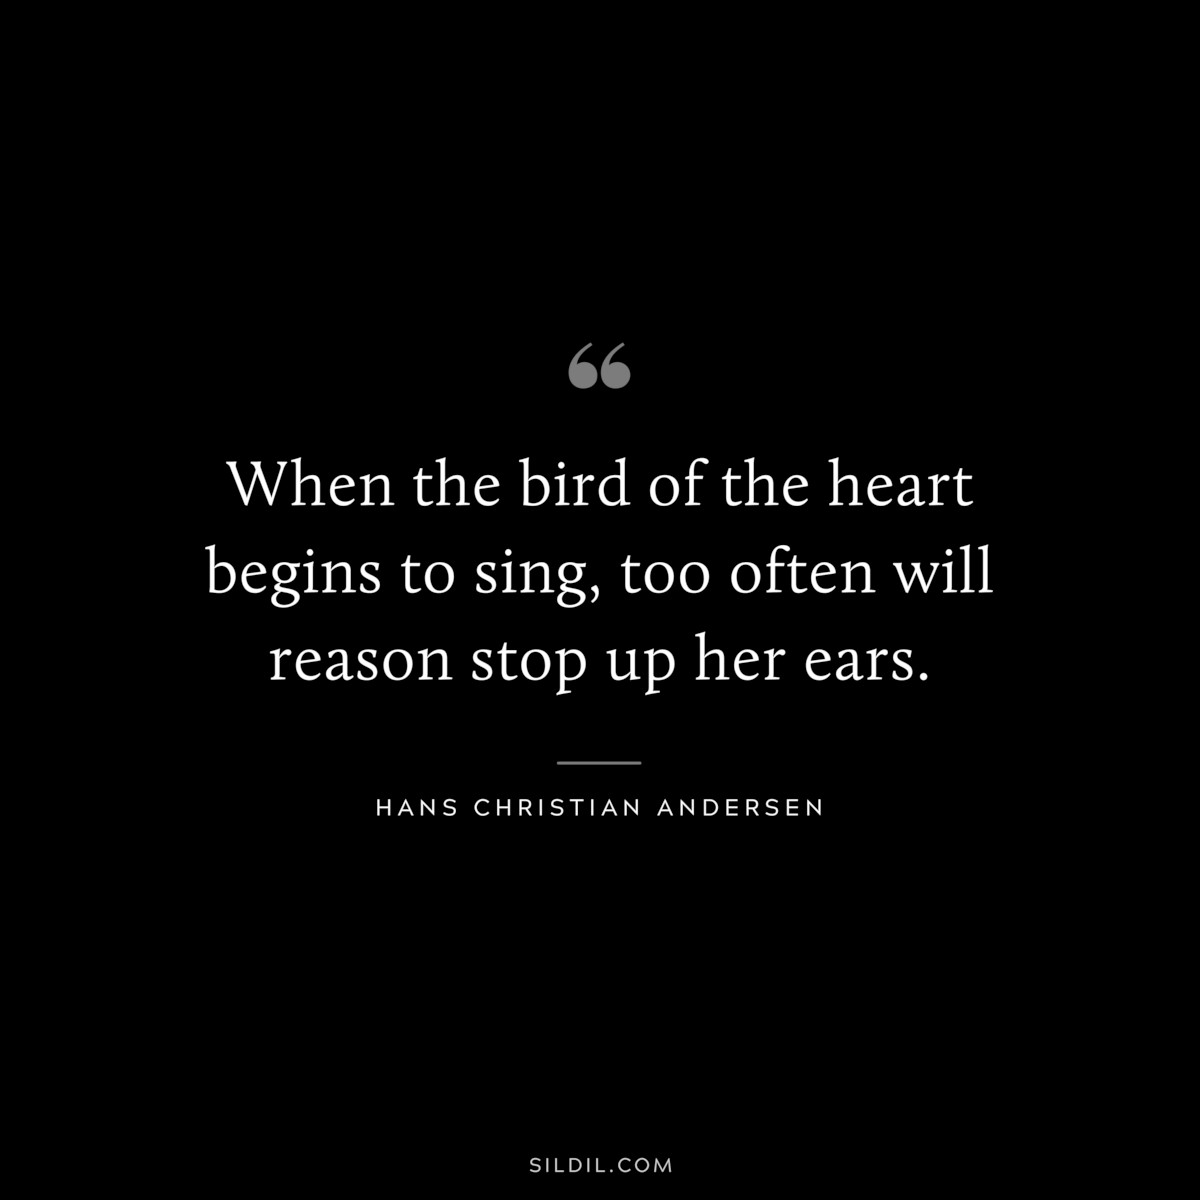 When the bird of the heart begins to sing, too often will reason stop up her ears. ― Hans Christian Andersen